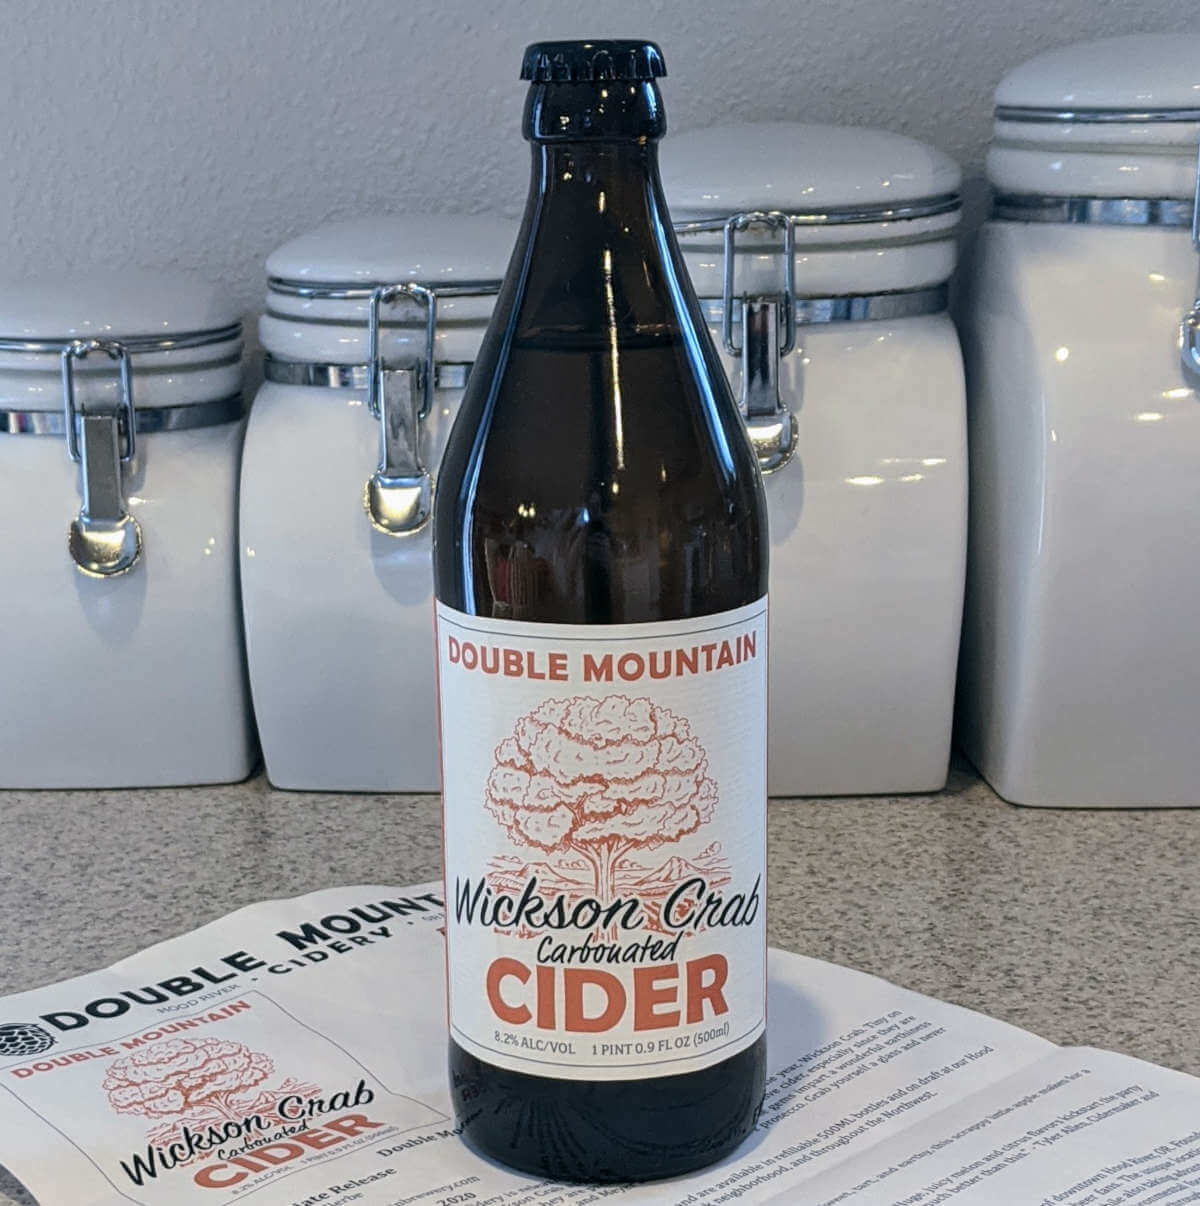 Received: Double Mountain Wickson Crab Cider, 2020 edition